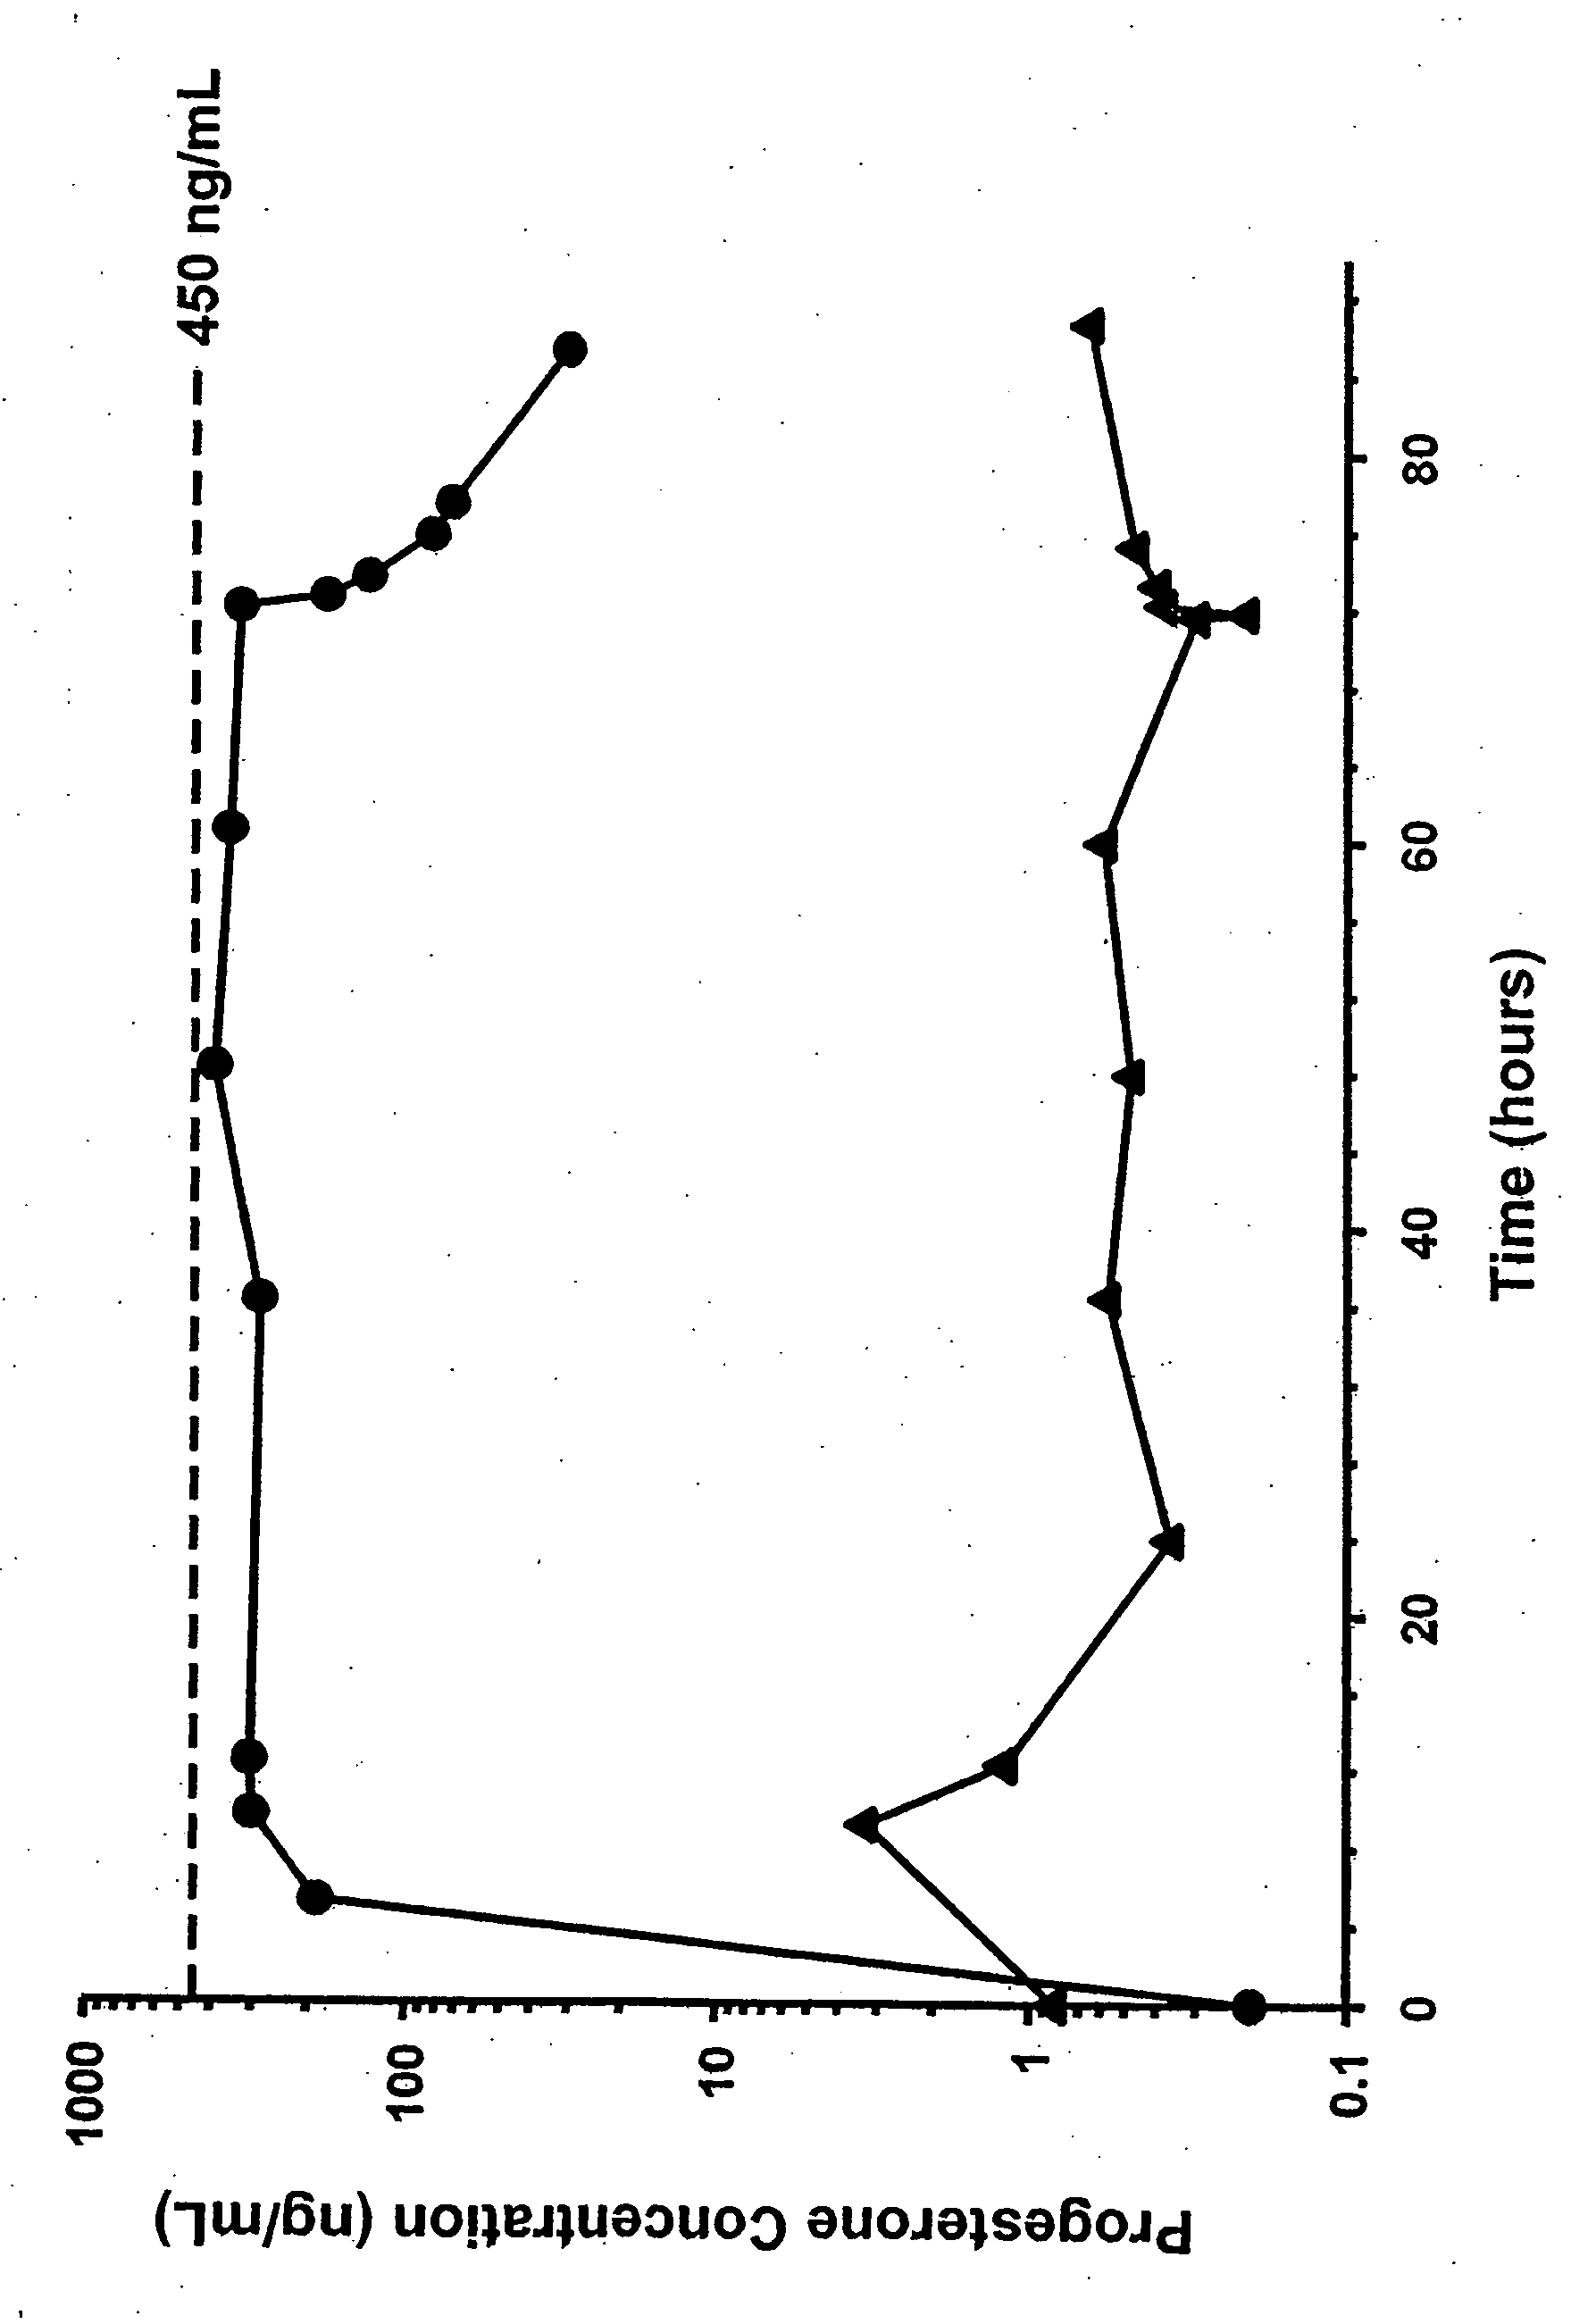 Methods for the treatment of a traumatic central nervous system injury